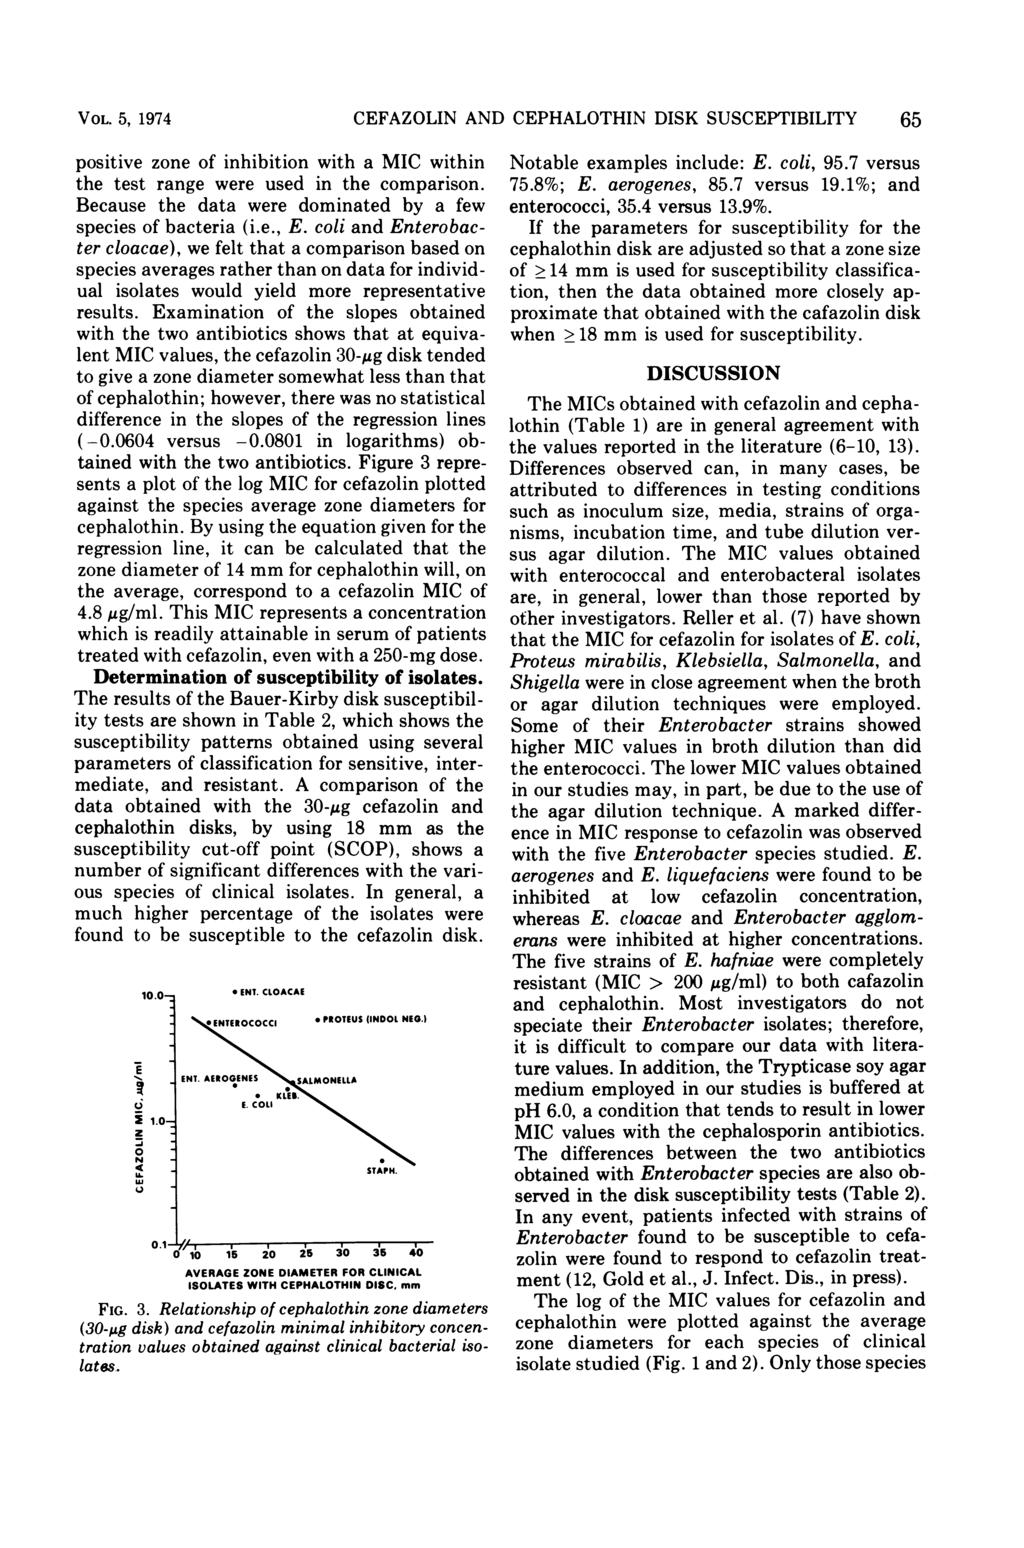 VOL. 5, 1974 CEFAZOLIN AND CEPHALOTHIN DISK SUSCEPTIBILITY 65 positive zone of inhibition with a MIC within the test range were used in the comparison.